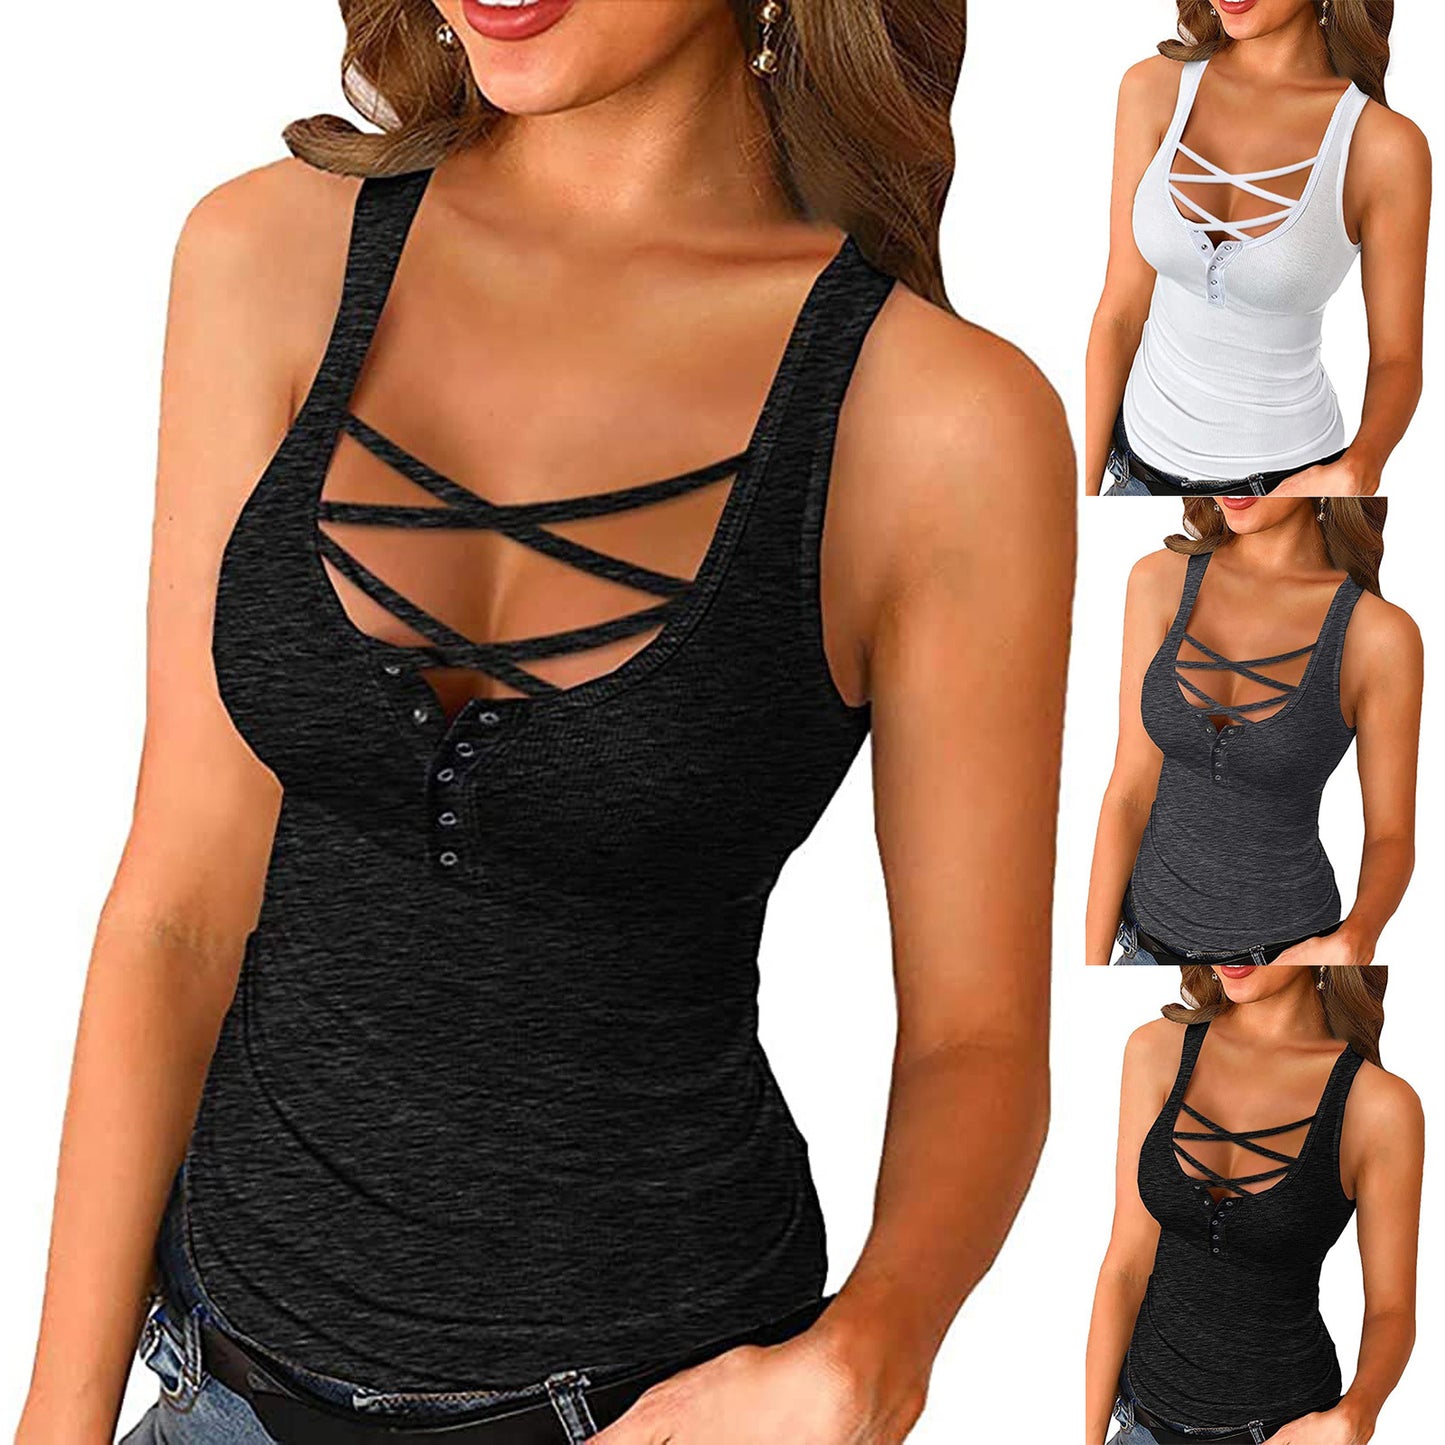 Strapping Small Tank Top Tight-fitting Suspender Knitted